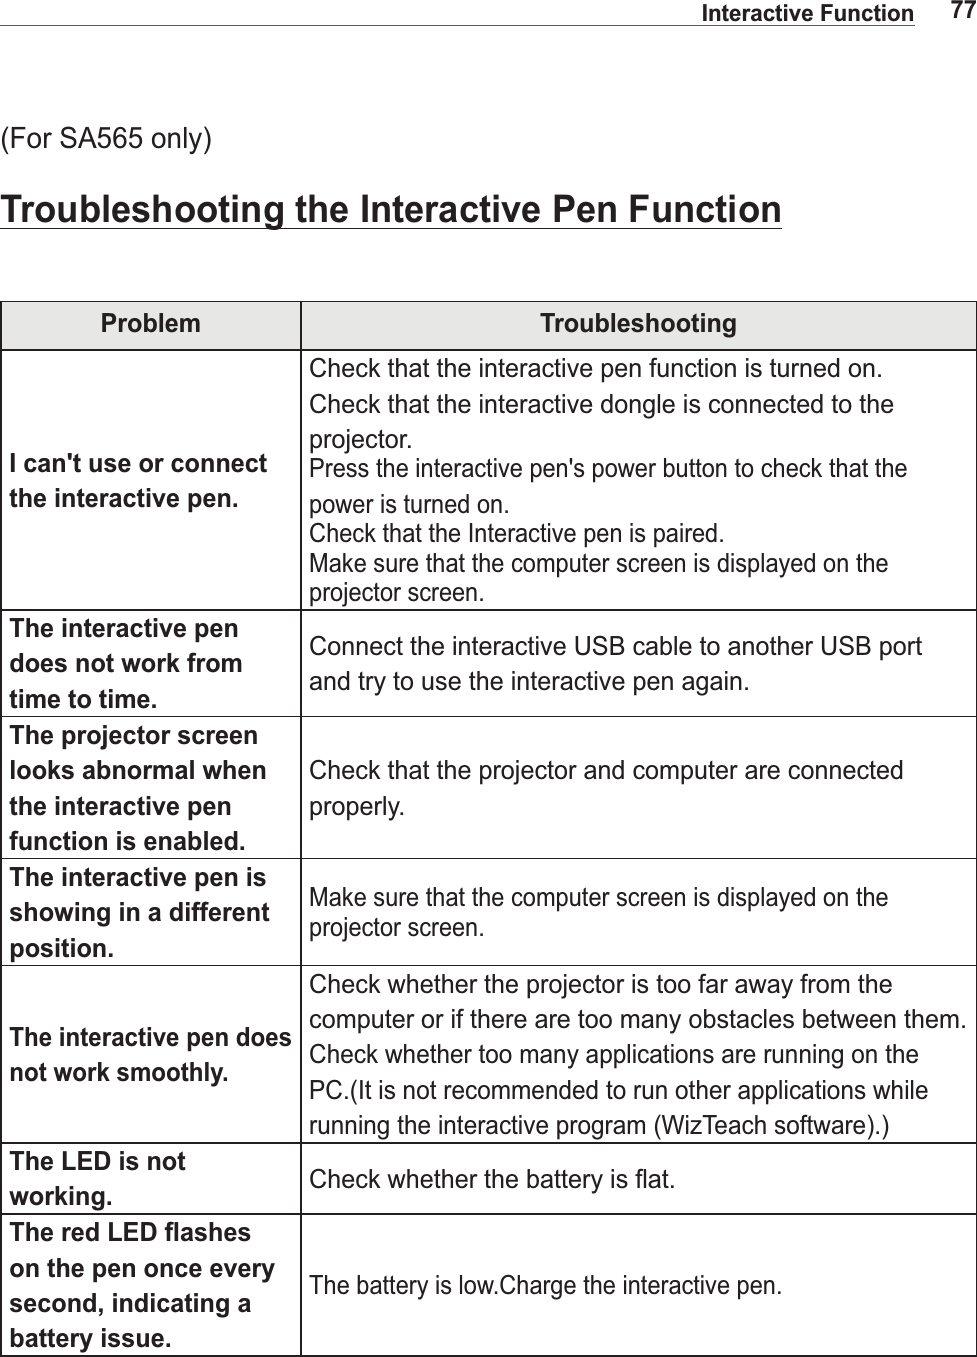 77Interactive Function Troubleshooting the Interactive Pen FunctionProblem TroubleshootingI can&apos;t use or connect the interactive pen.Check that the interactive pen function is turned on.Check that the interactive dongle is connected to the projector.Press the interactive pen&apos;s power button to check that the power is turned on.Check that the Interactive pen is paired.Make sure that the computer screen is displayed on the projector screen.The interactive pen does not work from time to time. Connect the interactive USB cable to another USB port and try to use the interactive pen again.The projector screen looks abnormal when the interactive pen function is enabled.Check that the projector and computer are connected properly.The interactive pen is showing in a different position.Make sure that the computer screen is displayed on the projector screen.The interactive pen does not work smoothly.Check whether the projector is too far away from the computer or if there are too many obstacles between them. Check whether too many applications are running on the PC.(It is not recommended to run other applications while running the interactive program (WizTeach software).)The LED is not working. #$%;=on the pen once every second, indicating a battery issue.The battery is low.Charge the interactive pen.(For SA565 only)